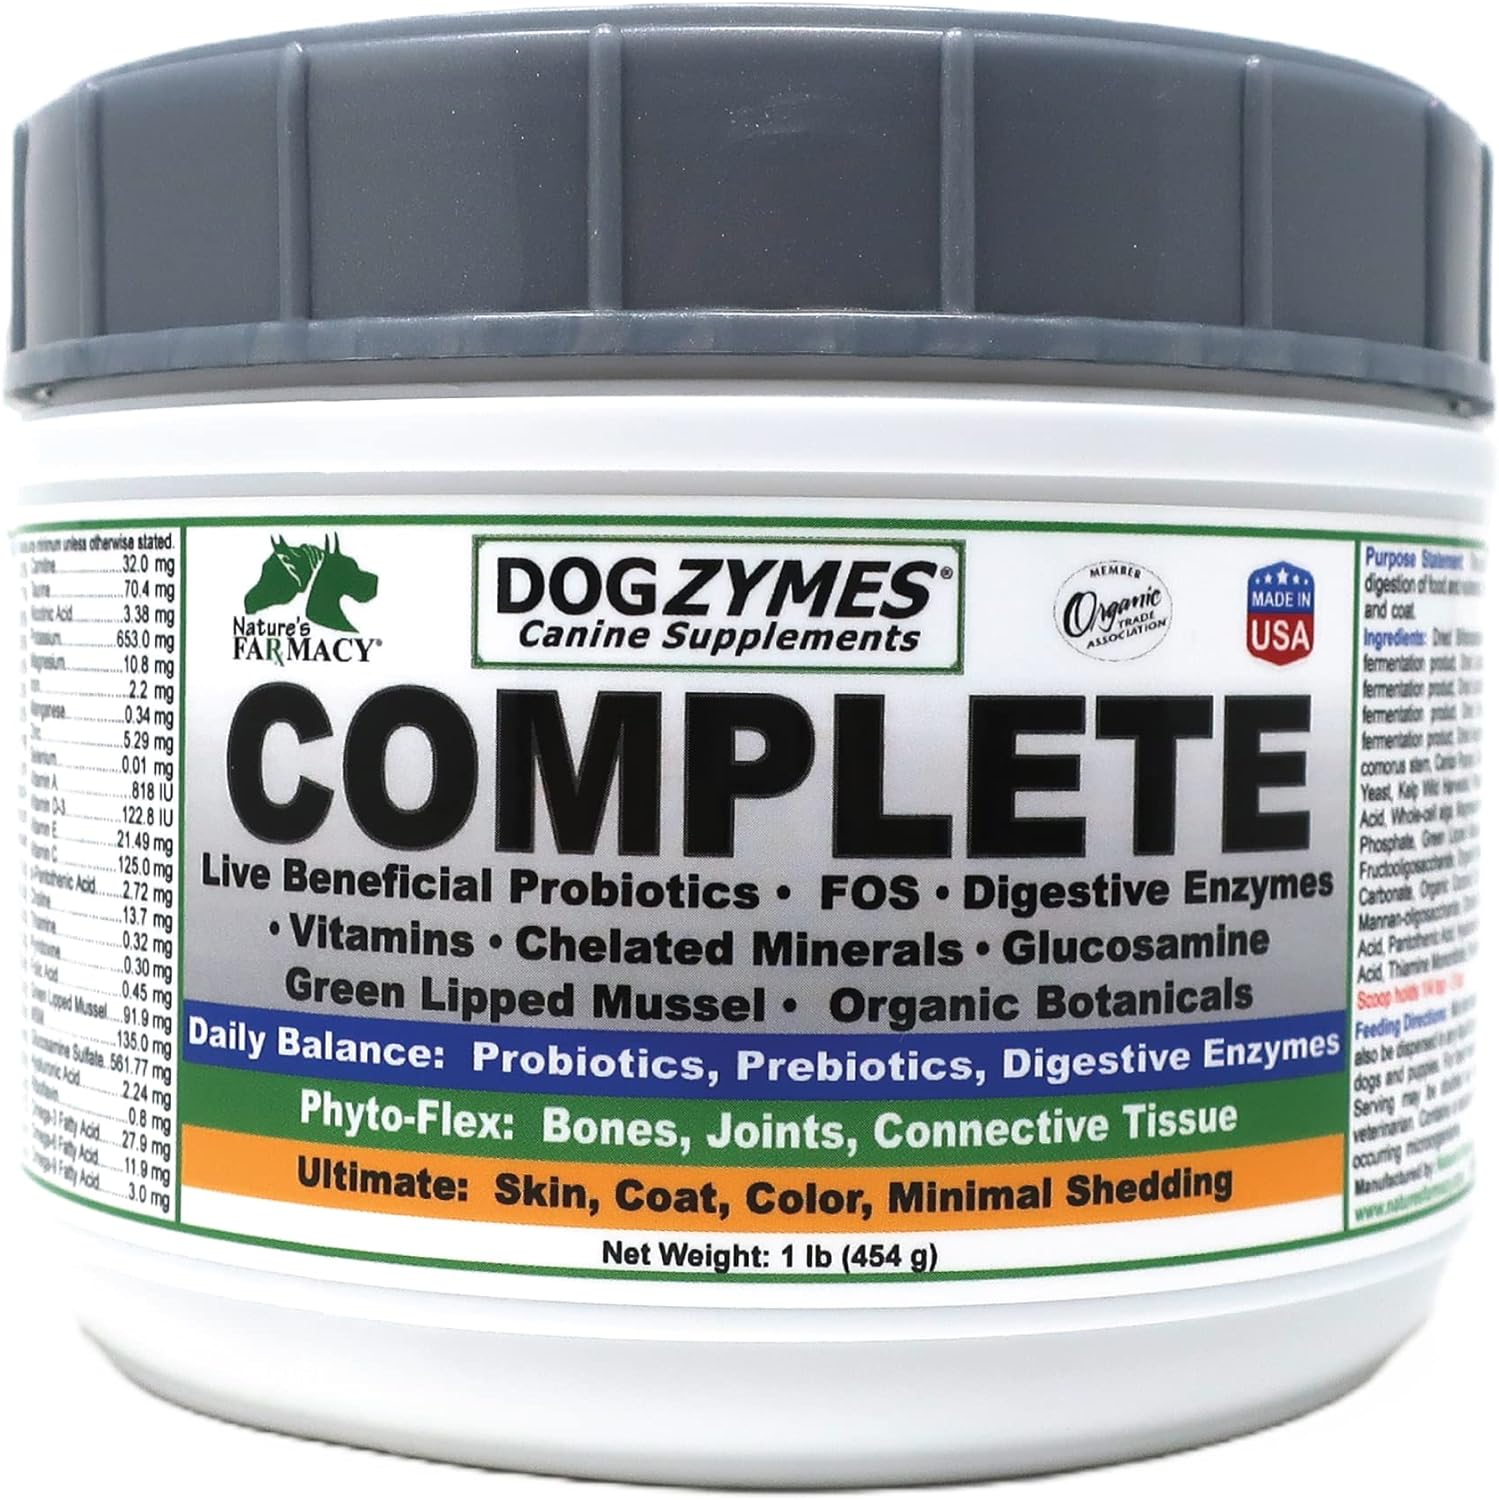 Dogzymes Complete - Probiotics, prebiotics, Glucosamine, Chondroitin, MSM and Hyaluronic Acid, Complete Skin and Coat Care (1 Pound)